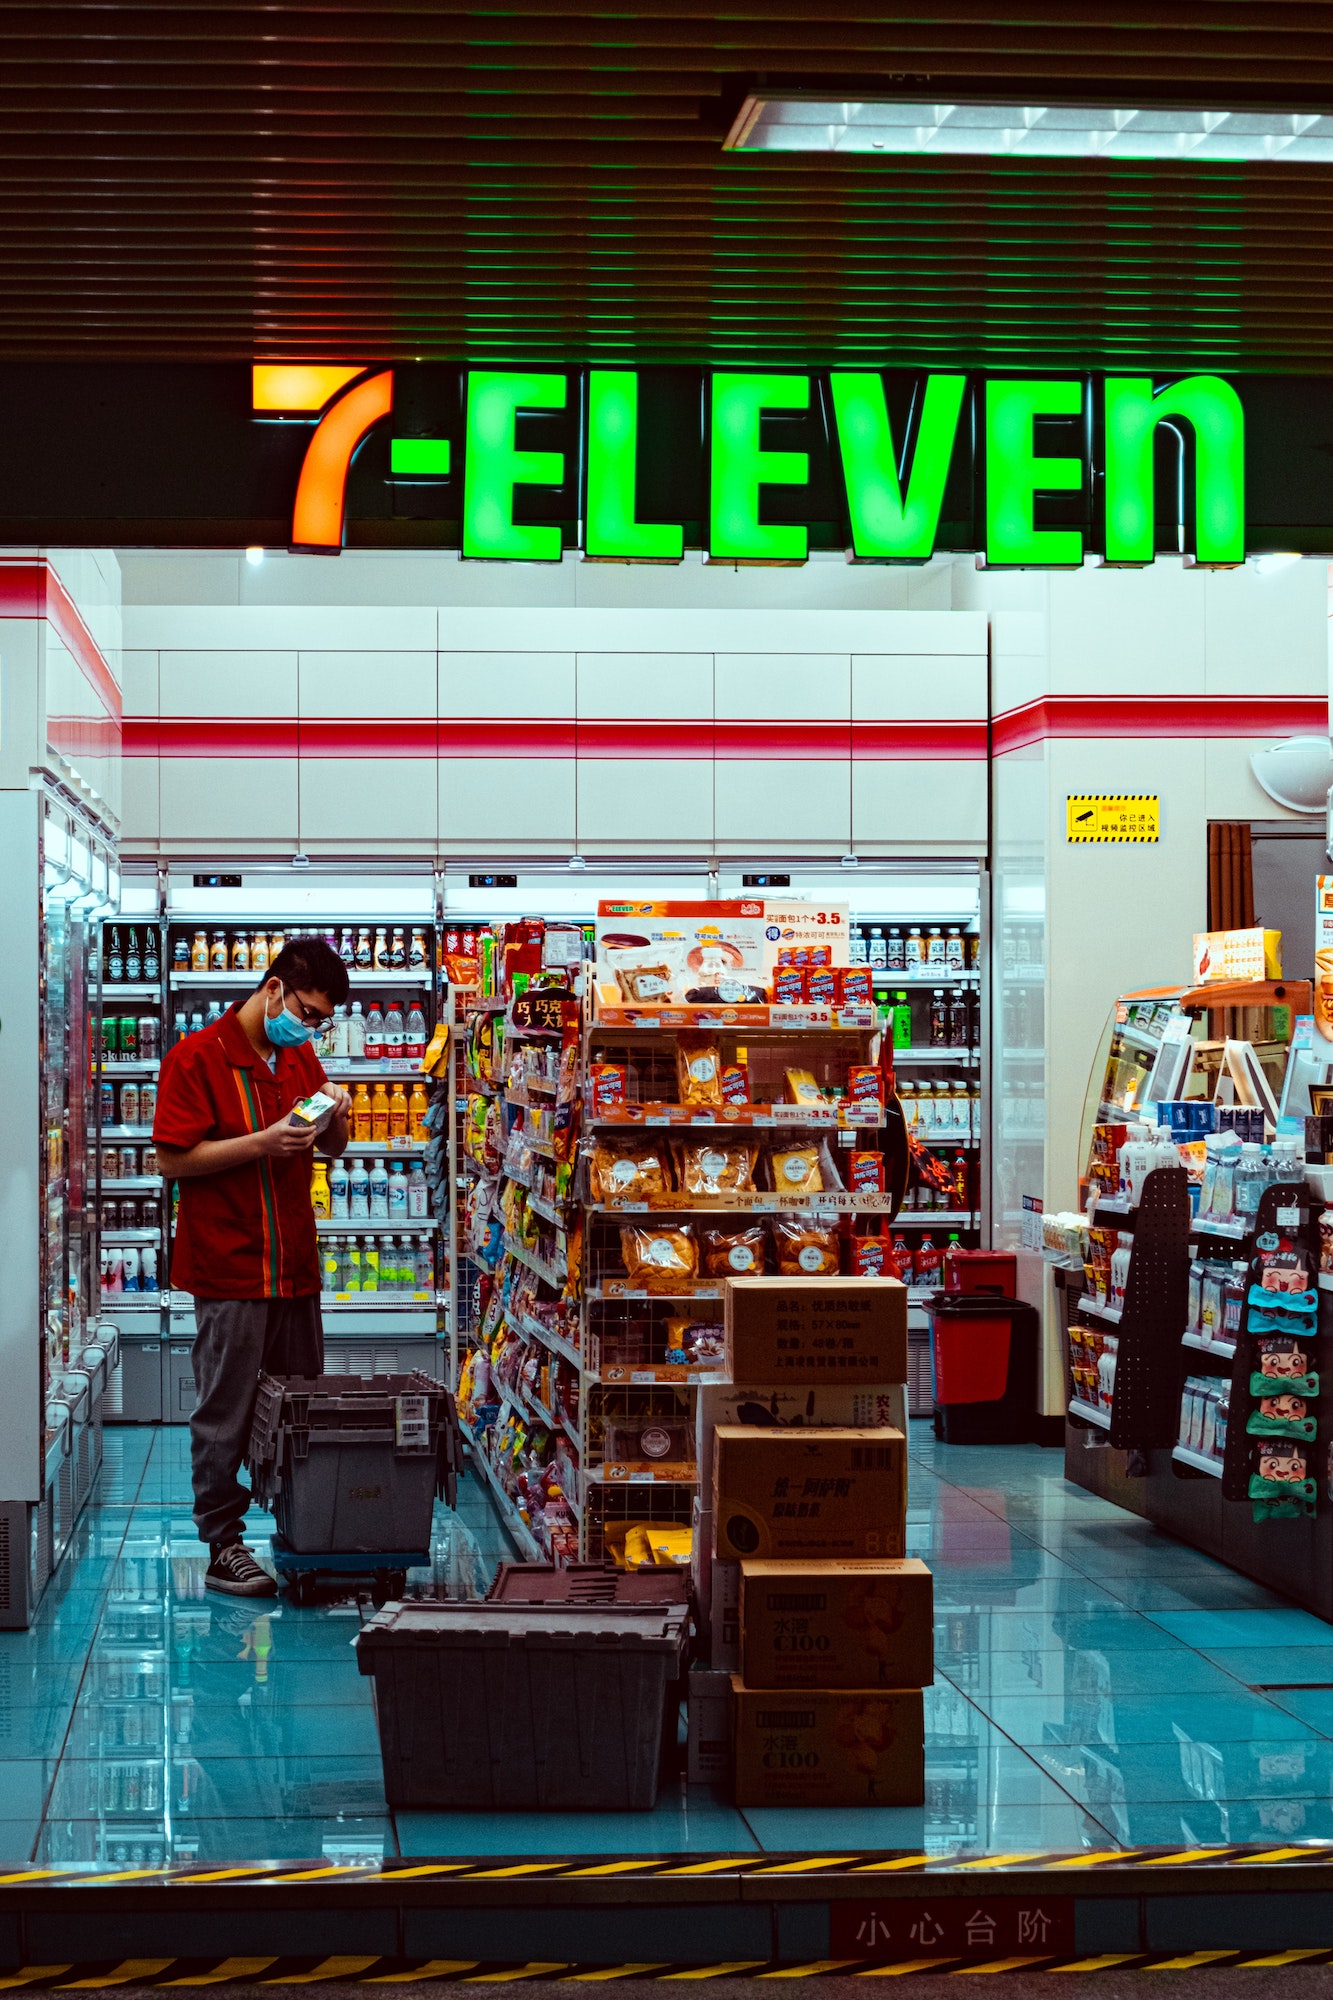 Stores like 7-Eleven contribute to everyone's convenient life